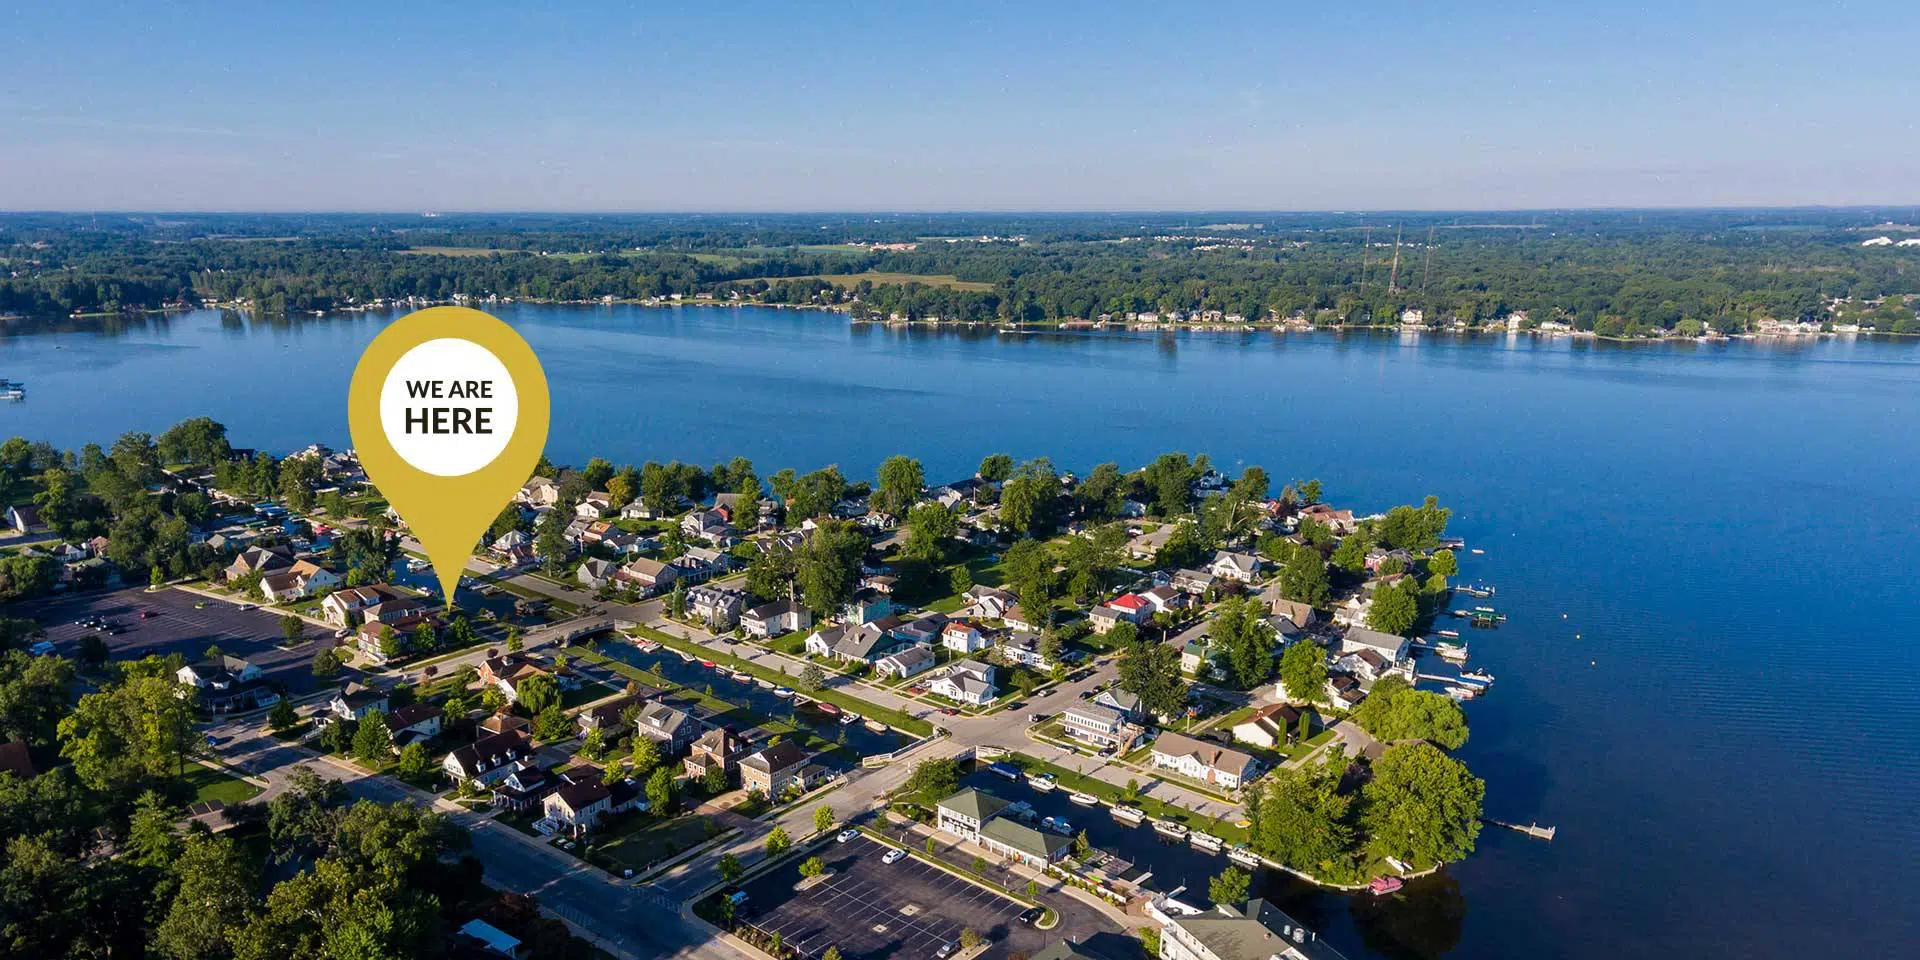 Aerial view of The Village at Winona with a map marker showing The Olive Branch location in Winona Lake, IN